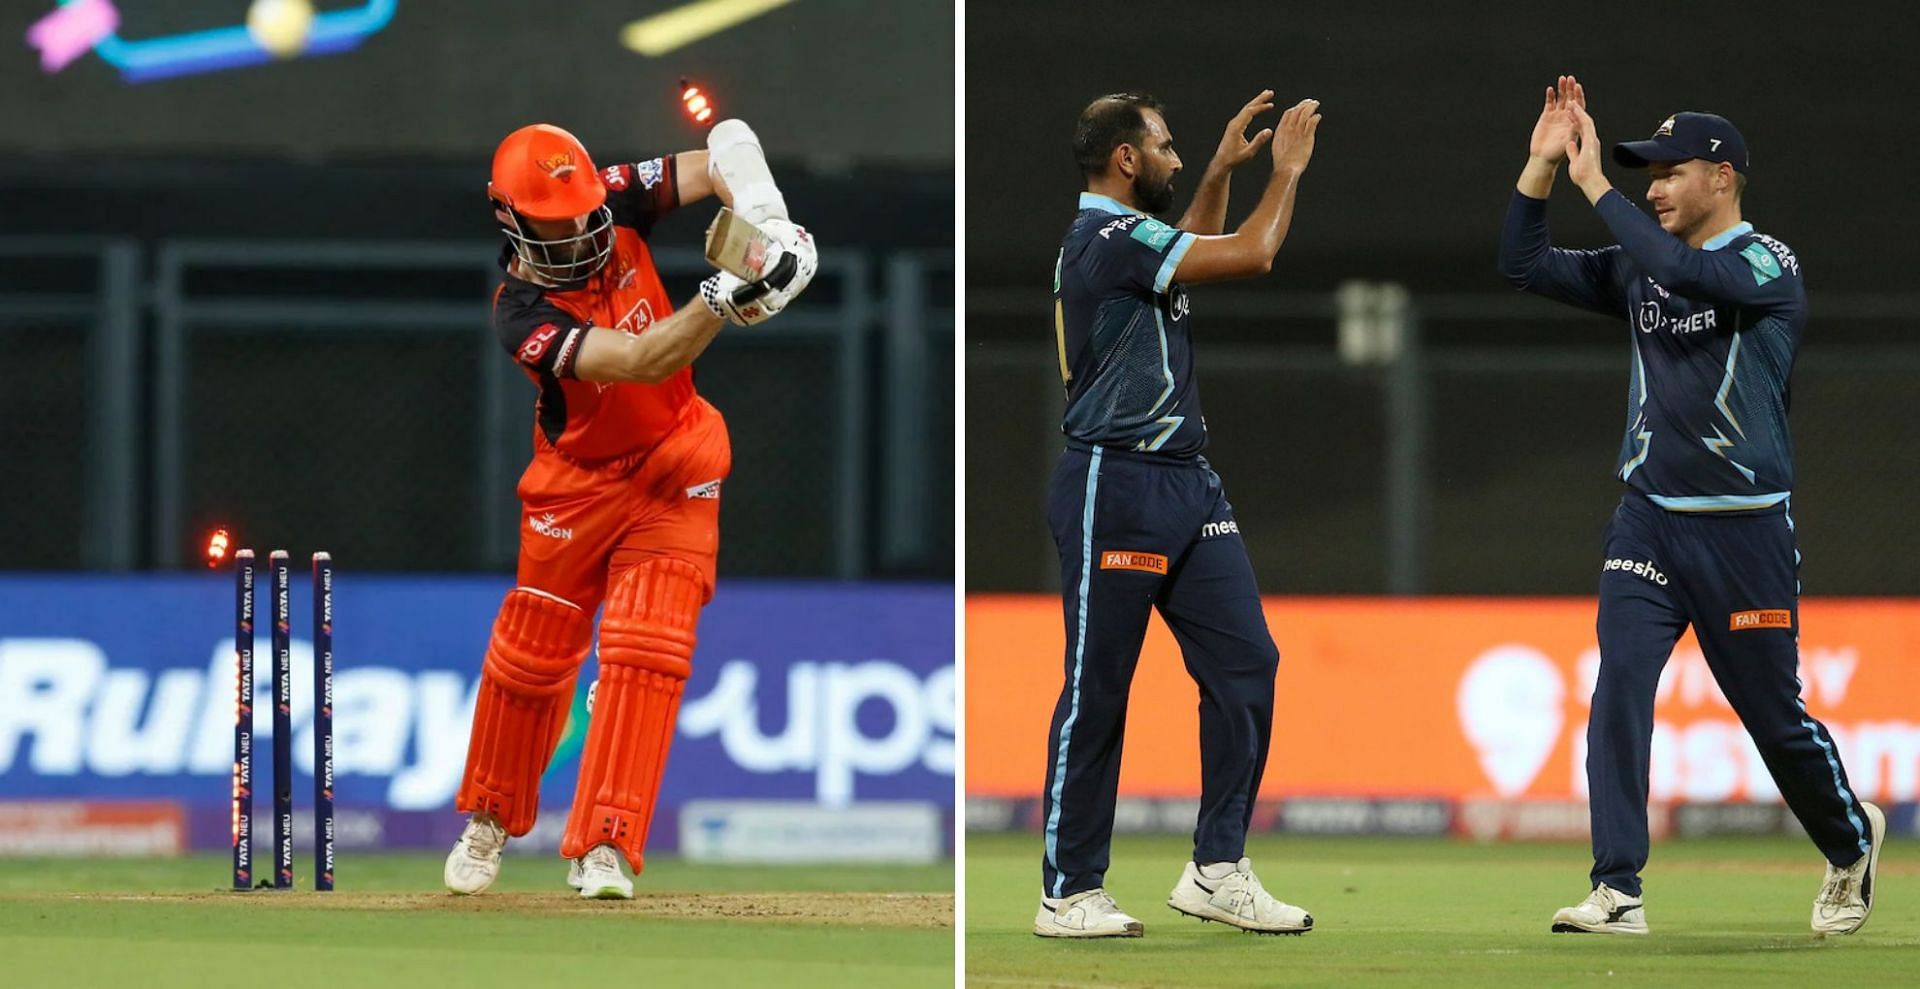 Mohammed Shami cleans up Kane Williamson with a brilliant in-swinger (Credit: BCCI/IPL)